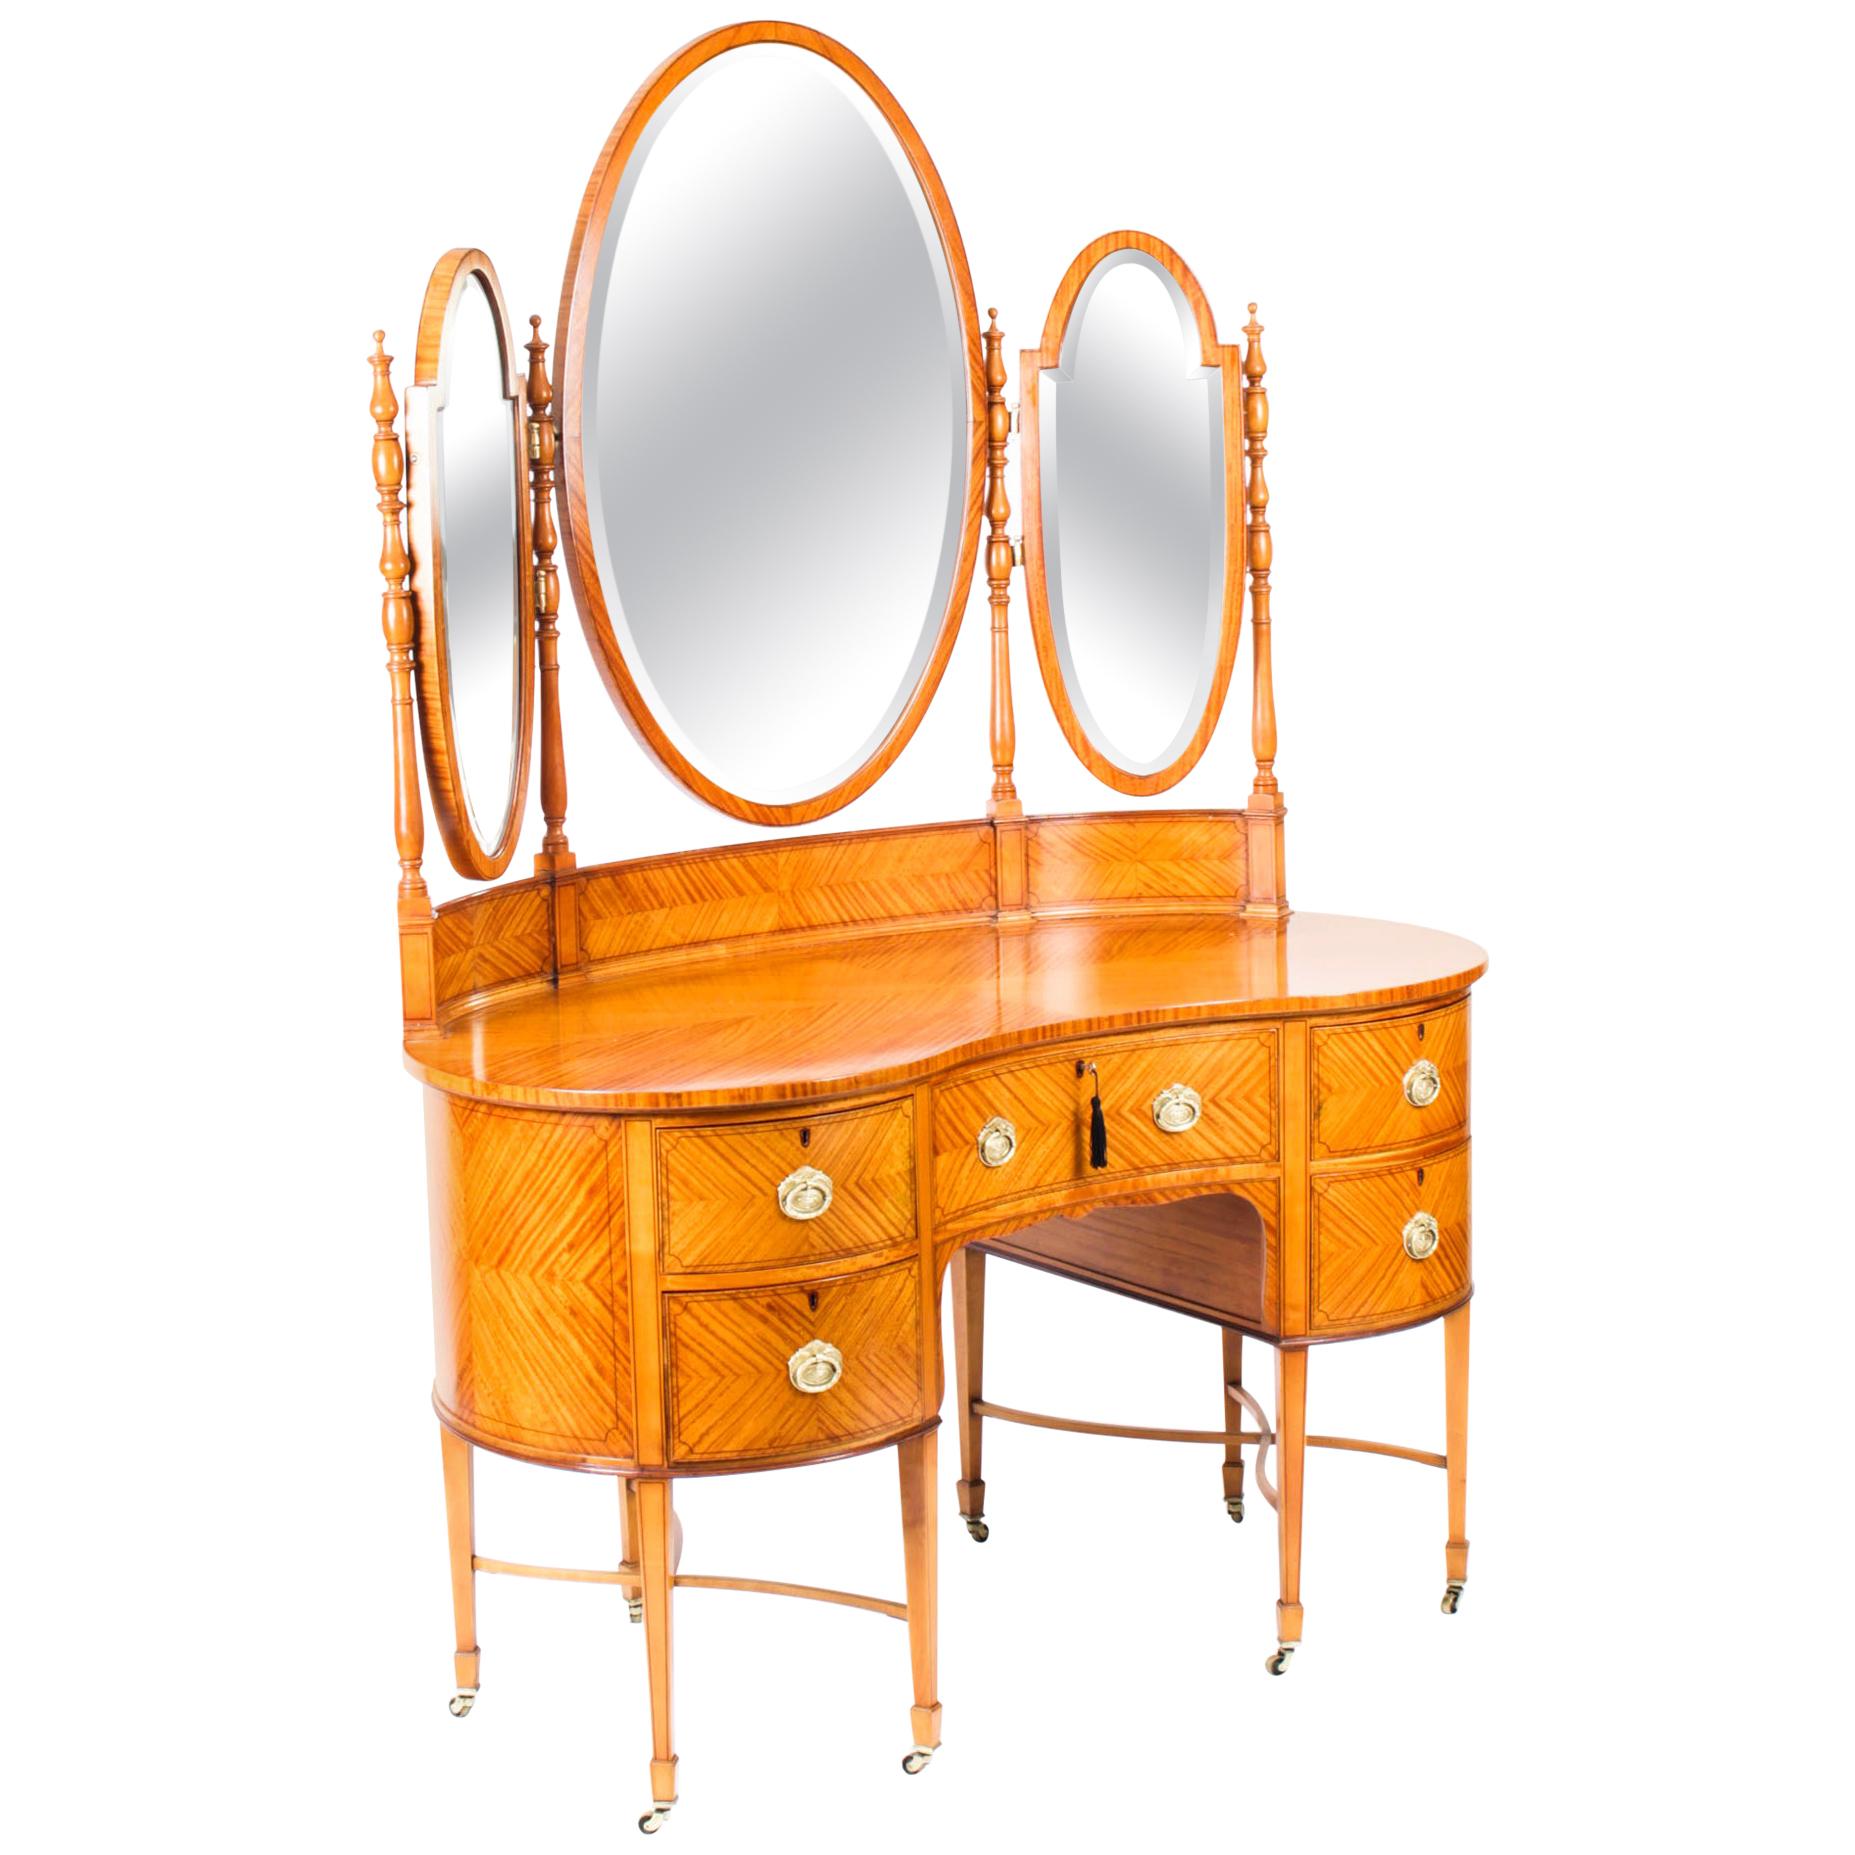 Antique Satinwood Kidney Dressing Table Attributed to Maple & Co, 19th Century